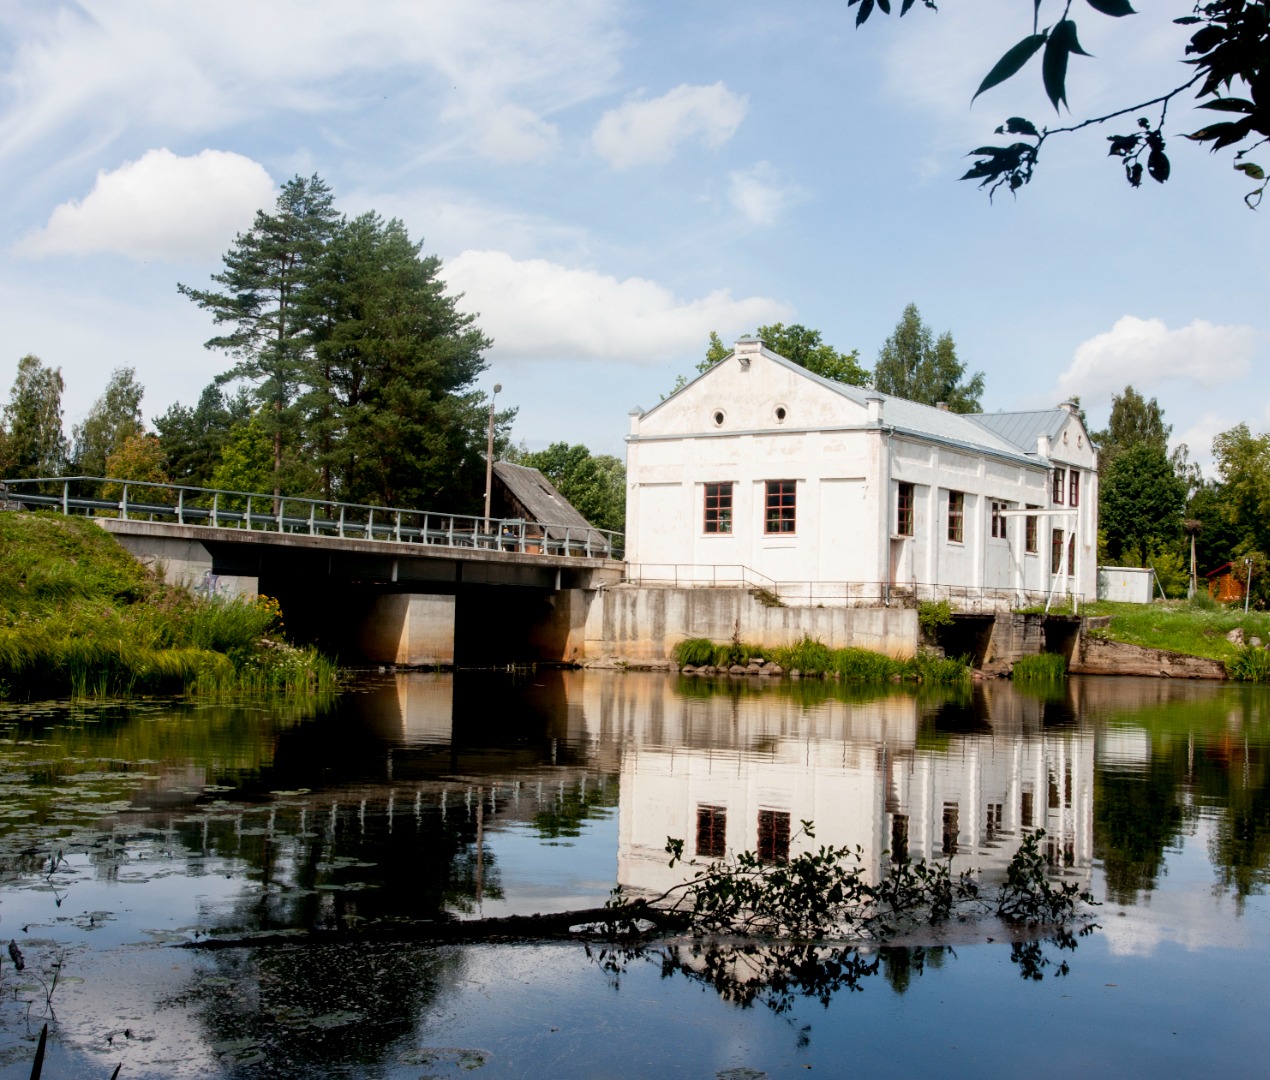 Hydroelectric power plant in the Võhandu River. rephoto